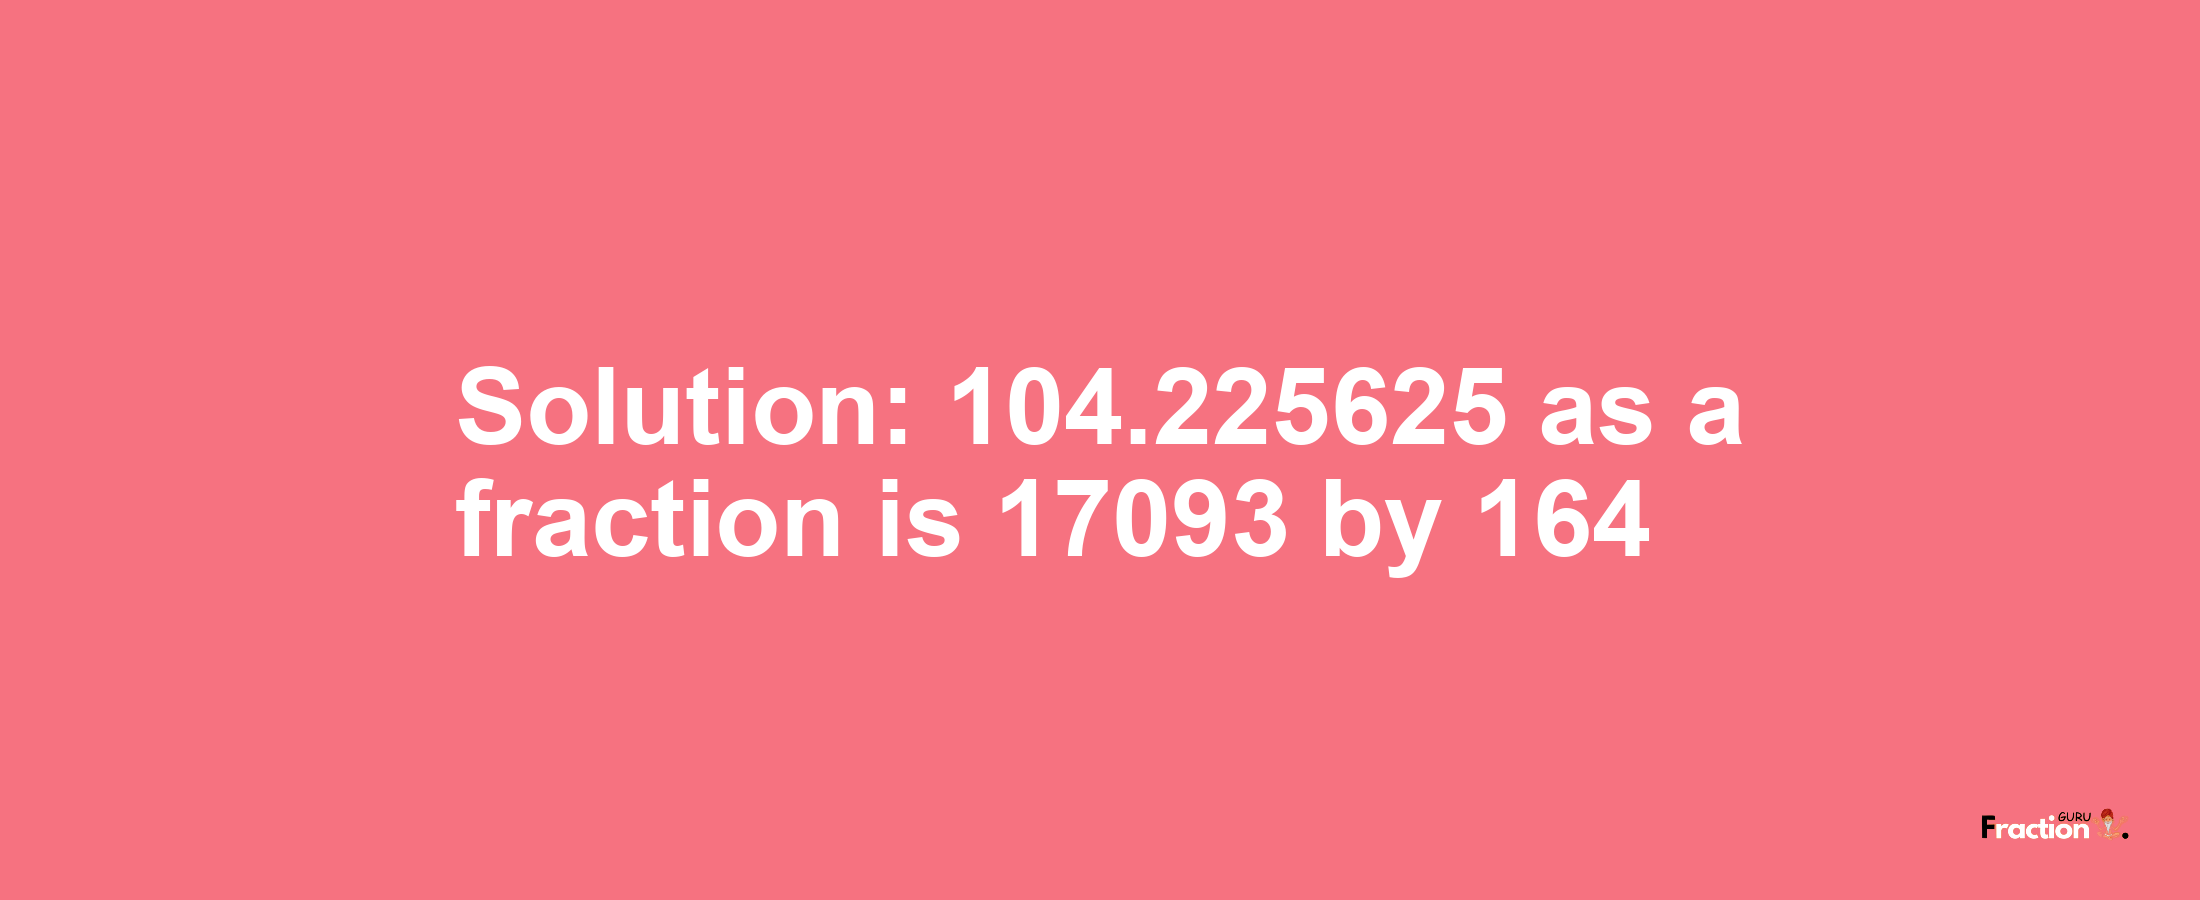 Solution:104.225625 as a fraction is 17093/164